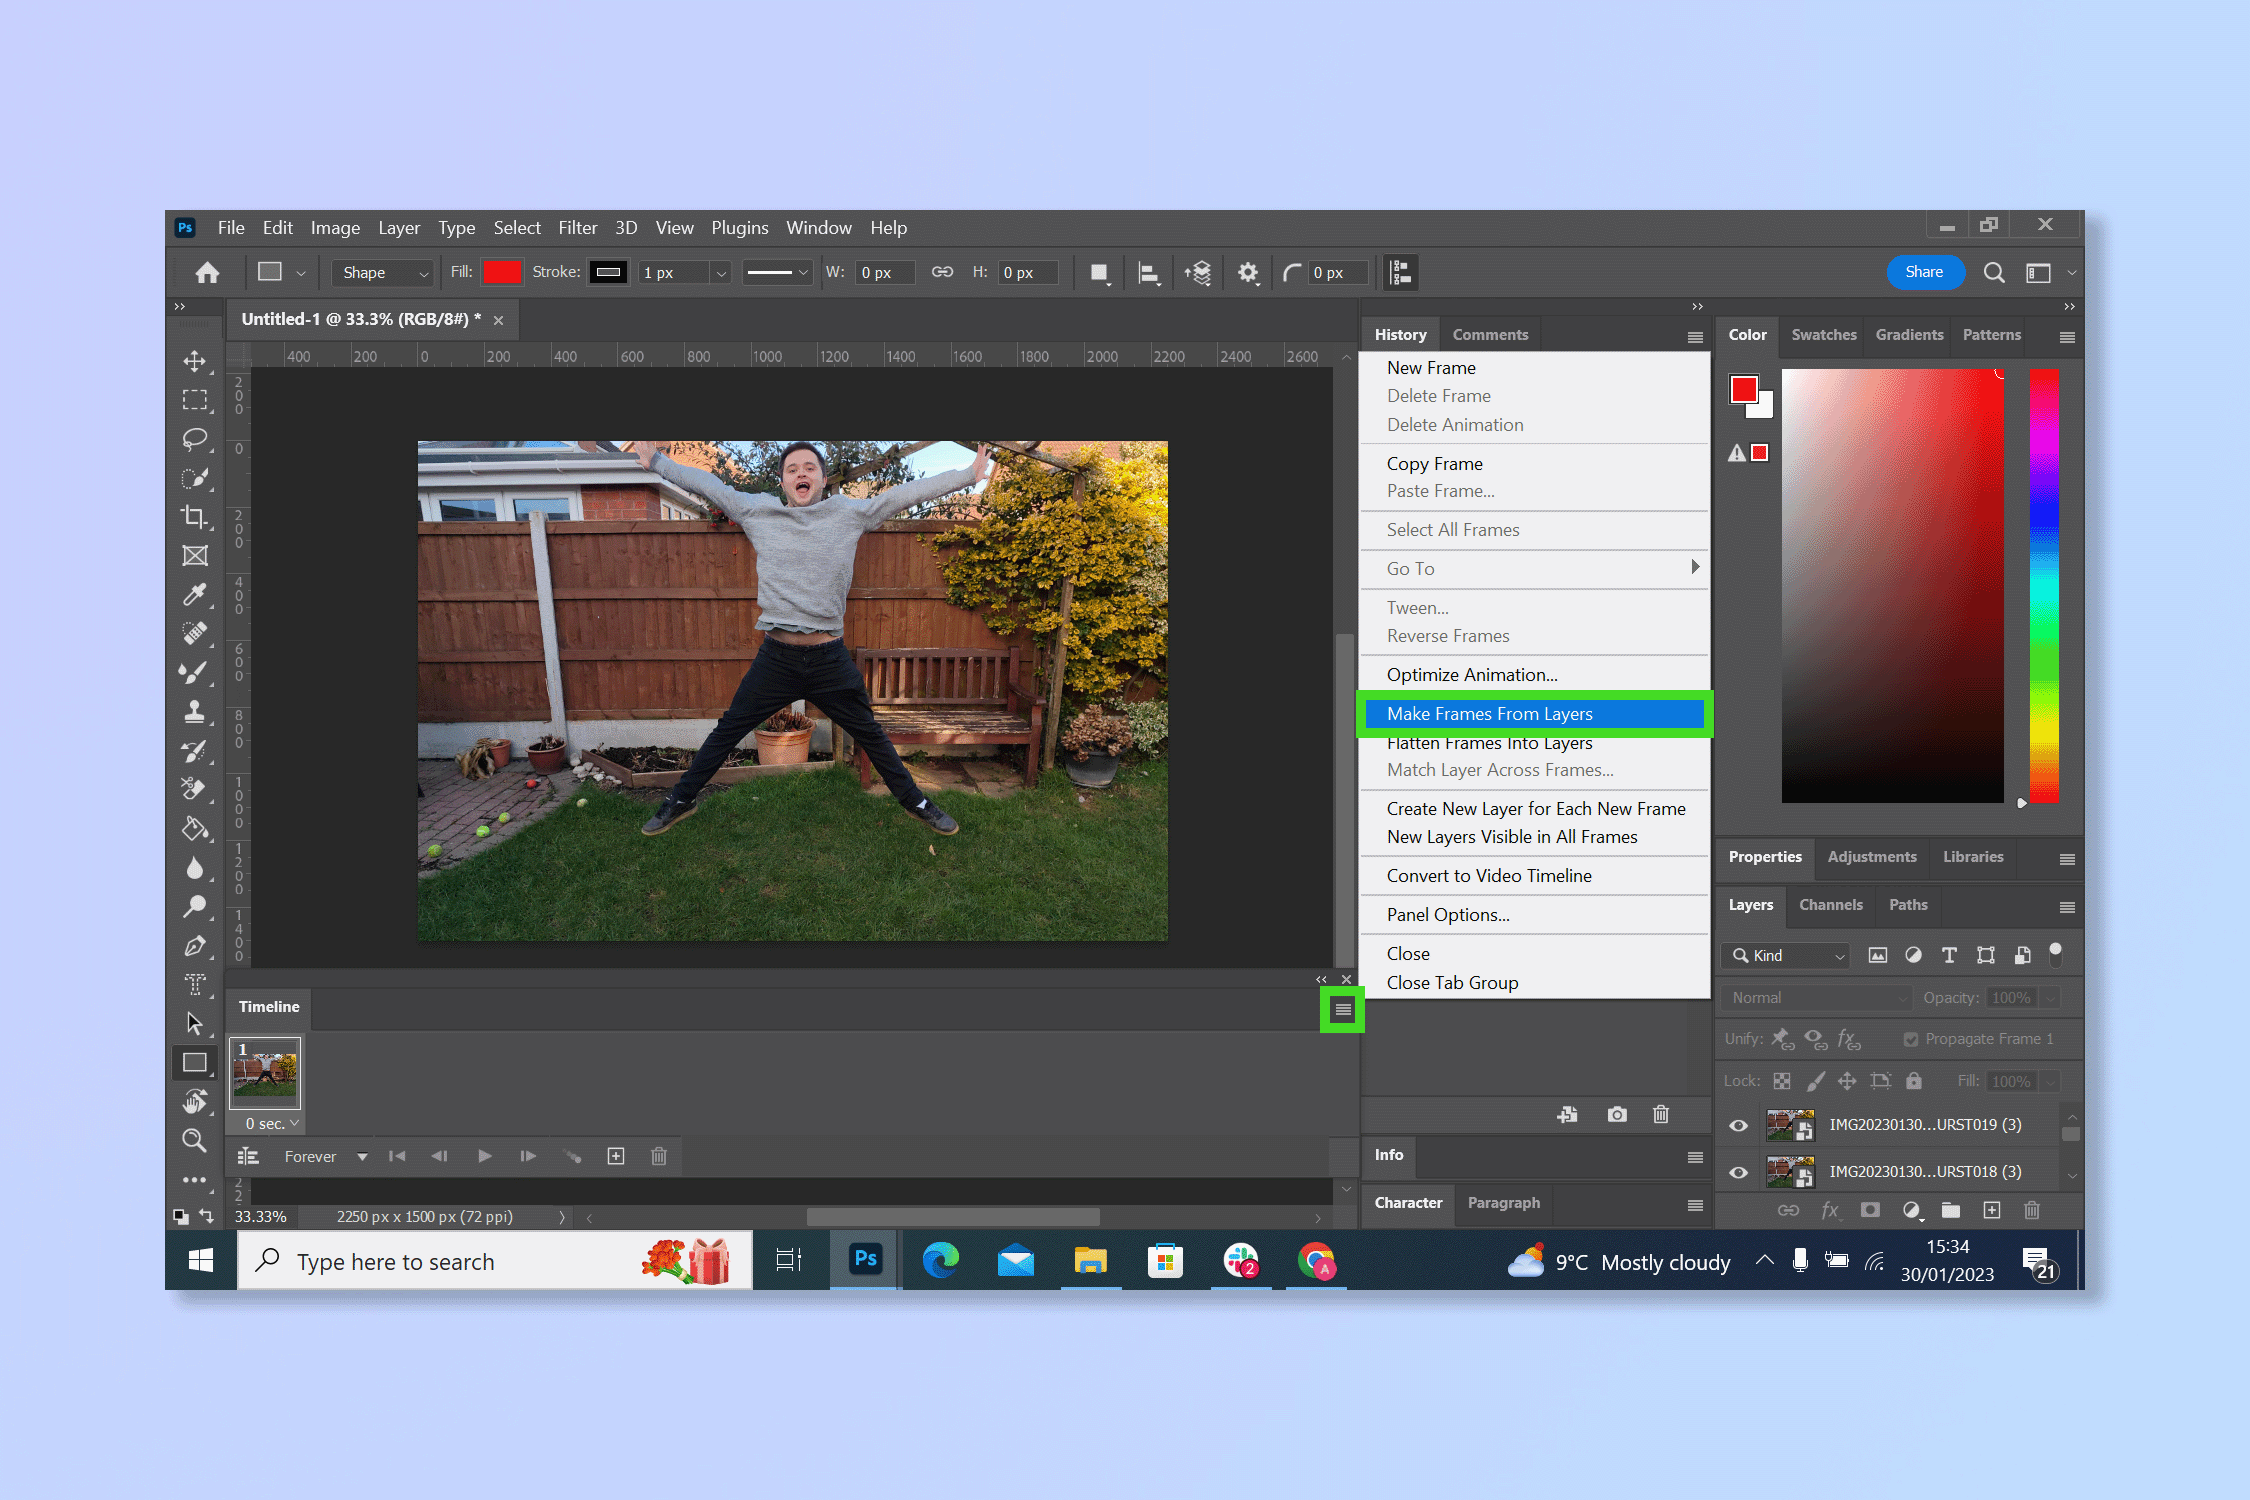 The fourth step to creating a Gif on Photoshop